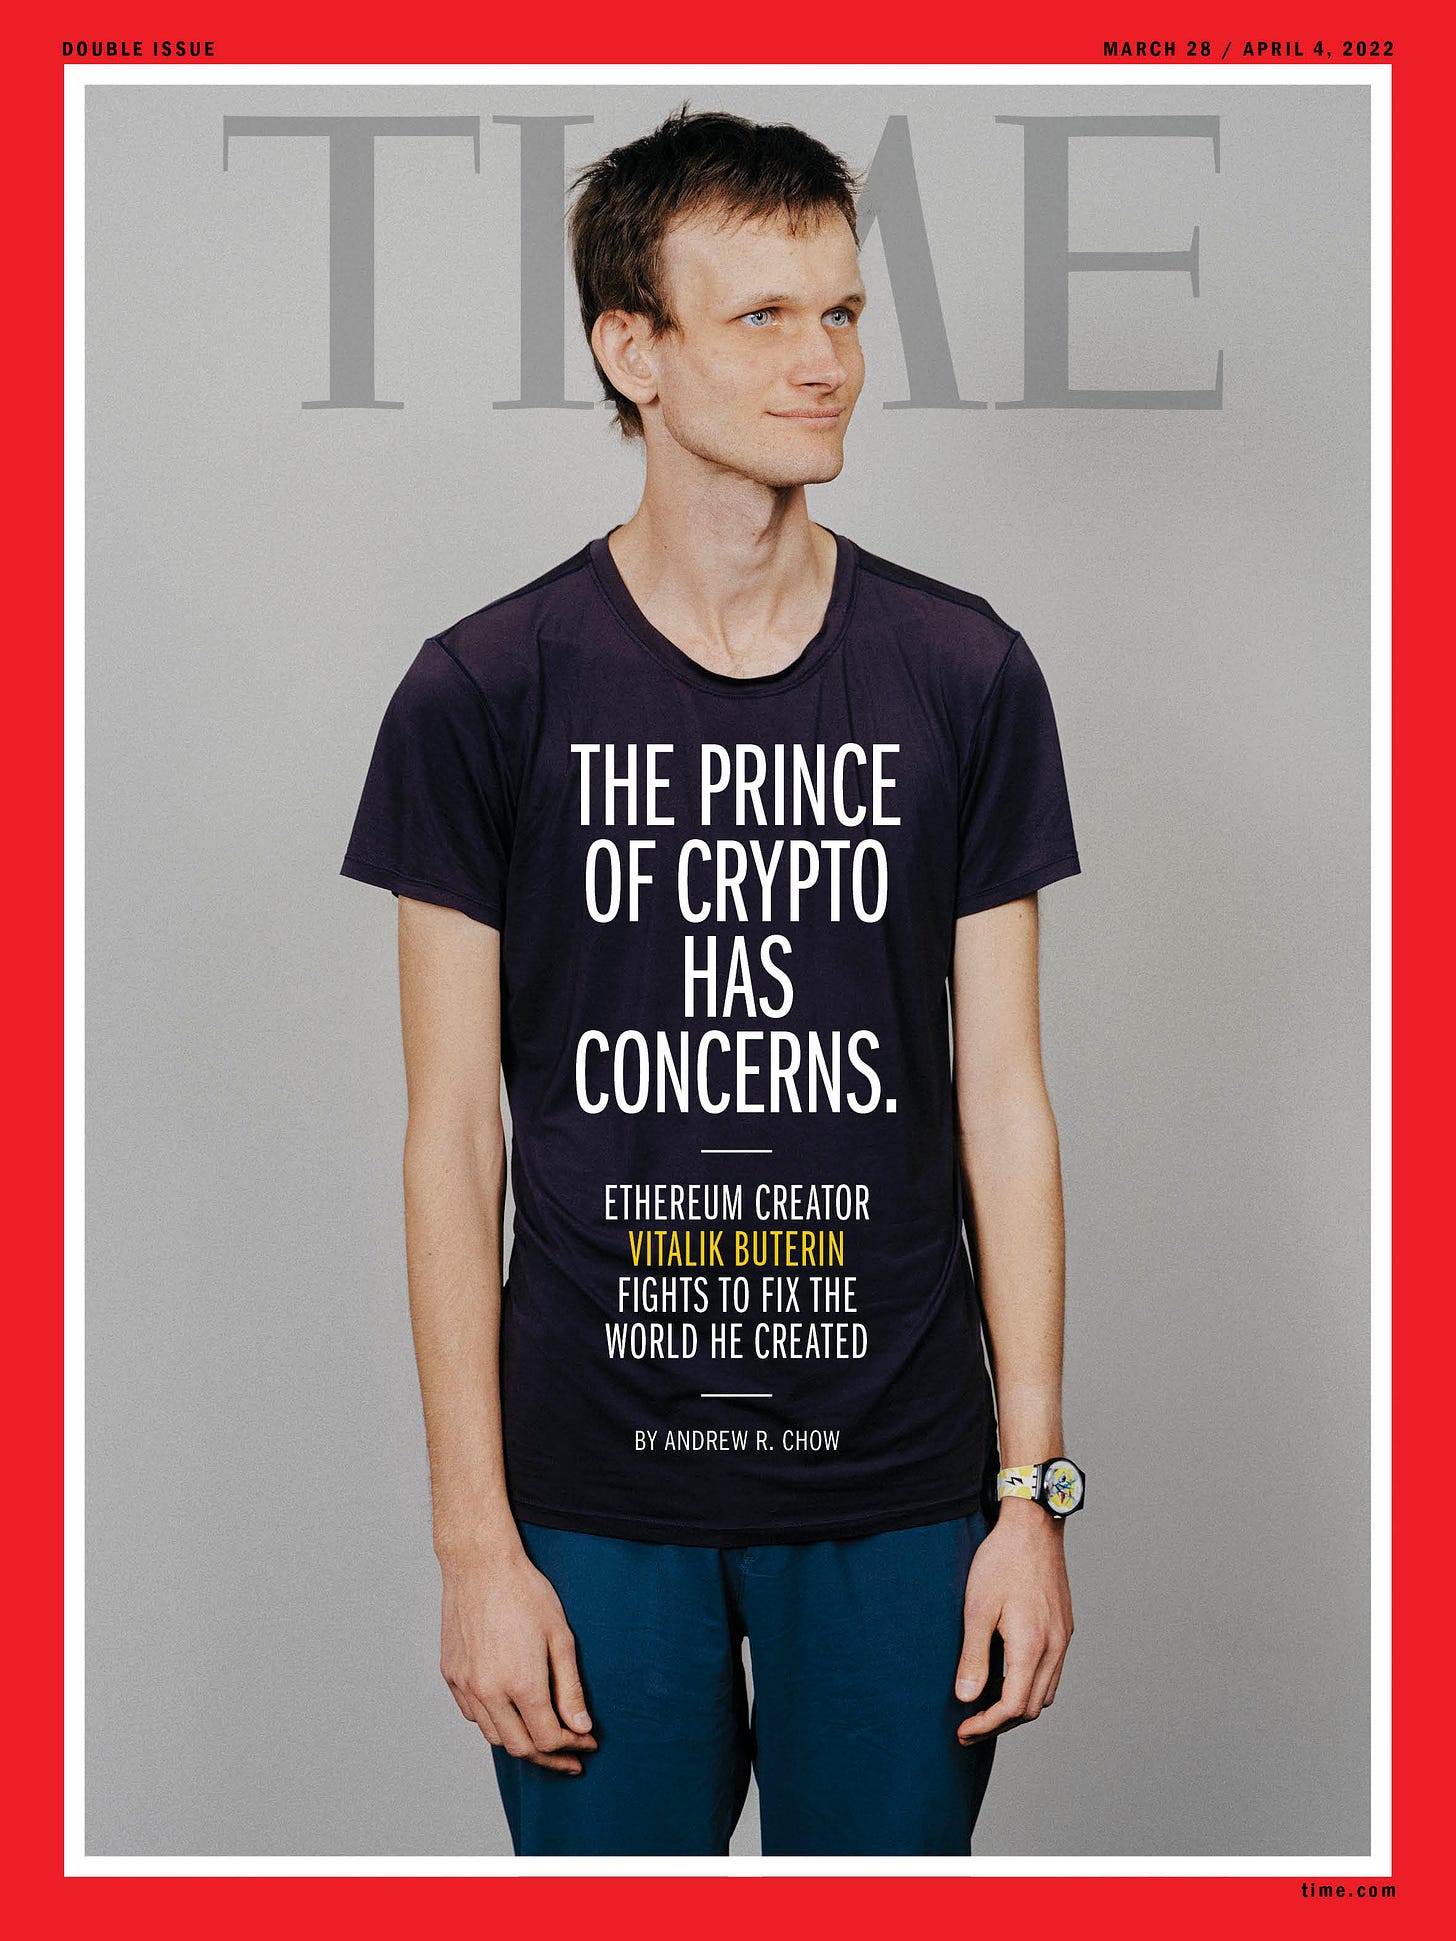 TIME Releases First-Ever Full Magazine Issue as an NFT | Time